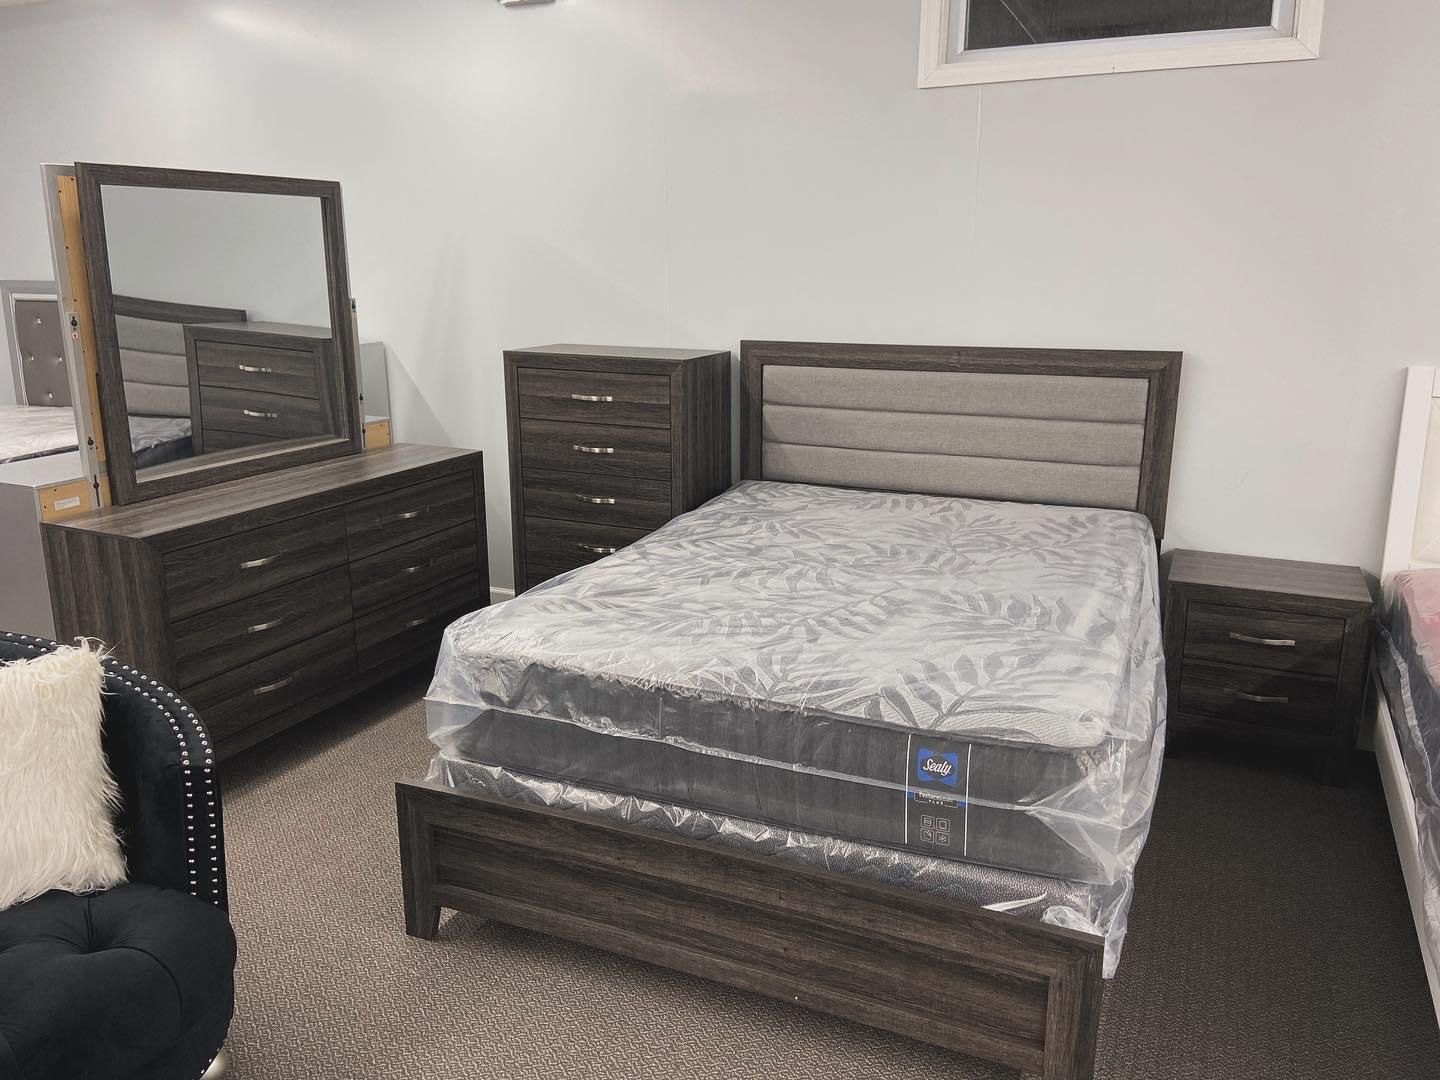 Brand New Complete Bed With Orthopedic Mattress For $399